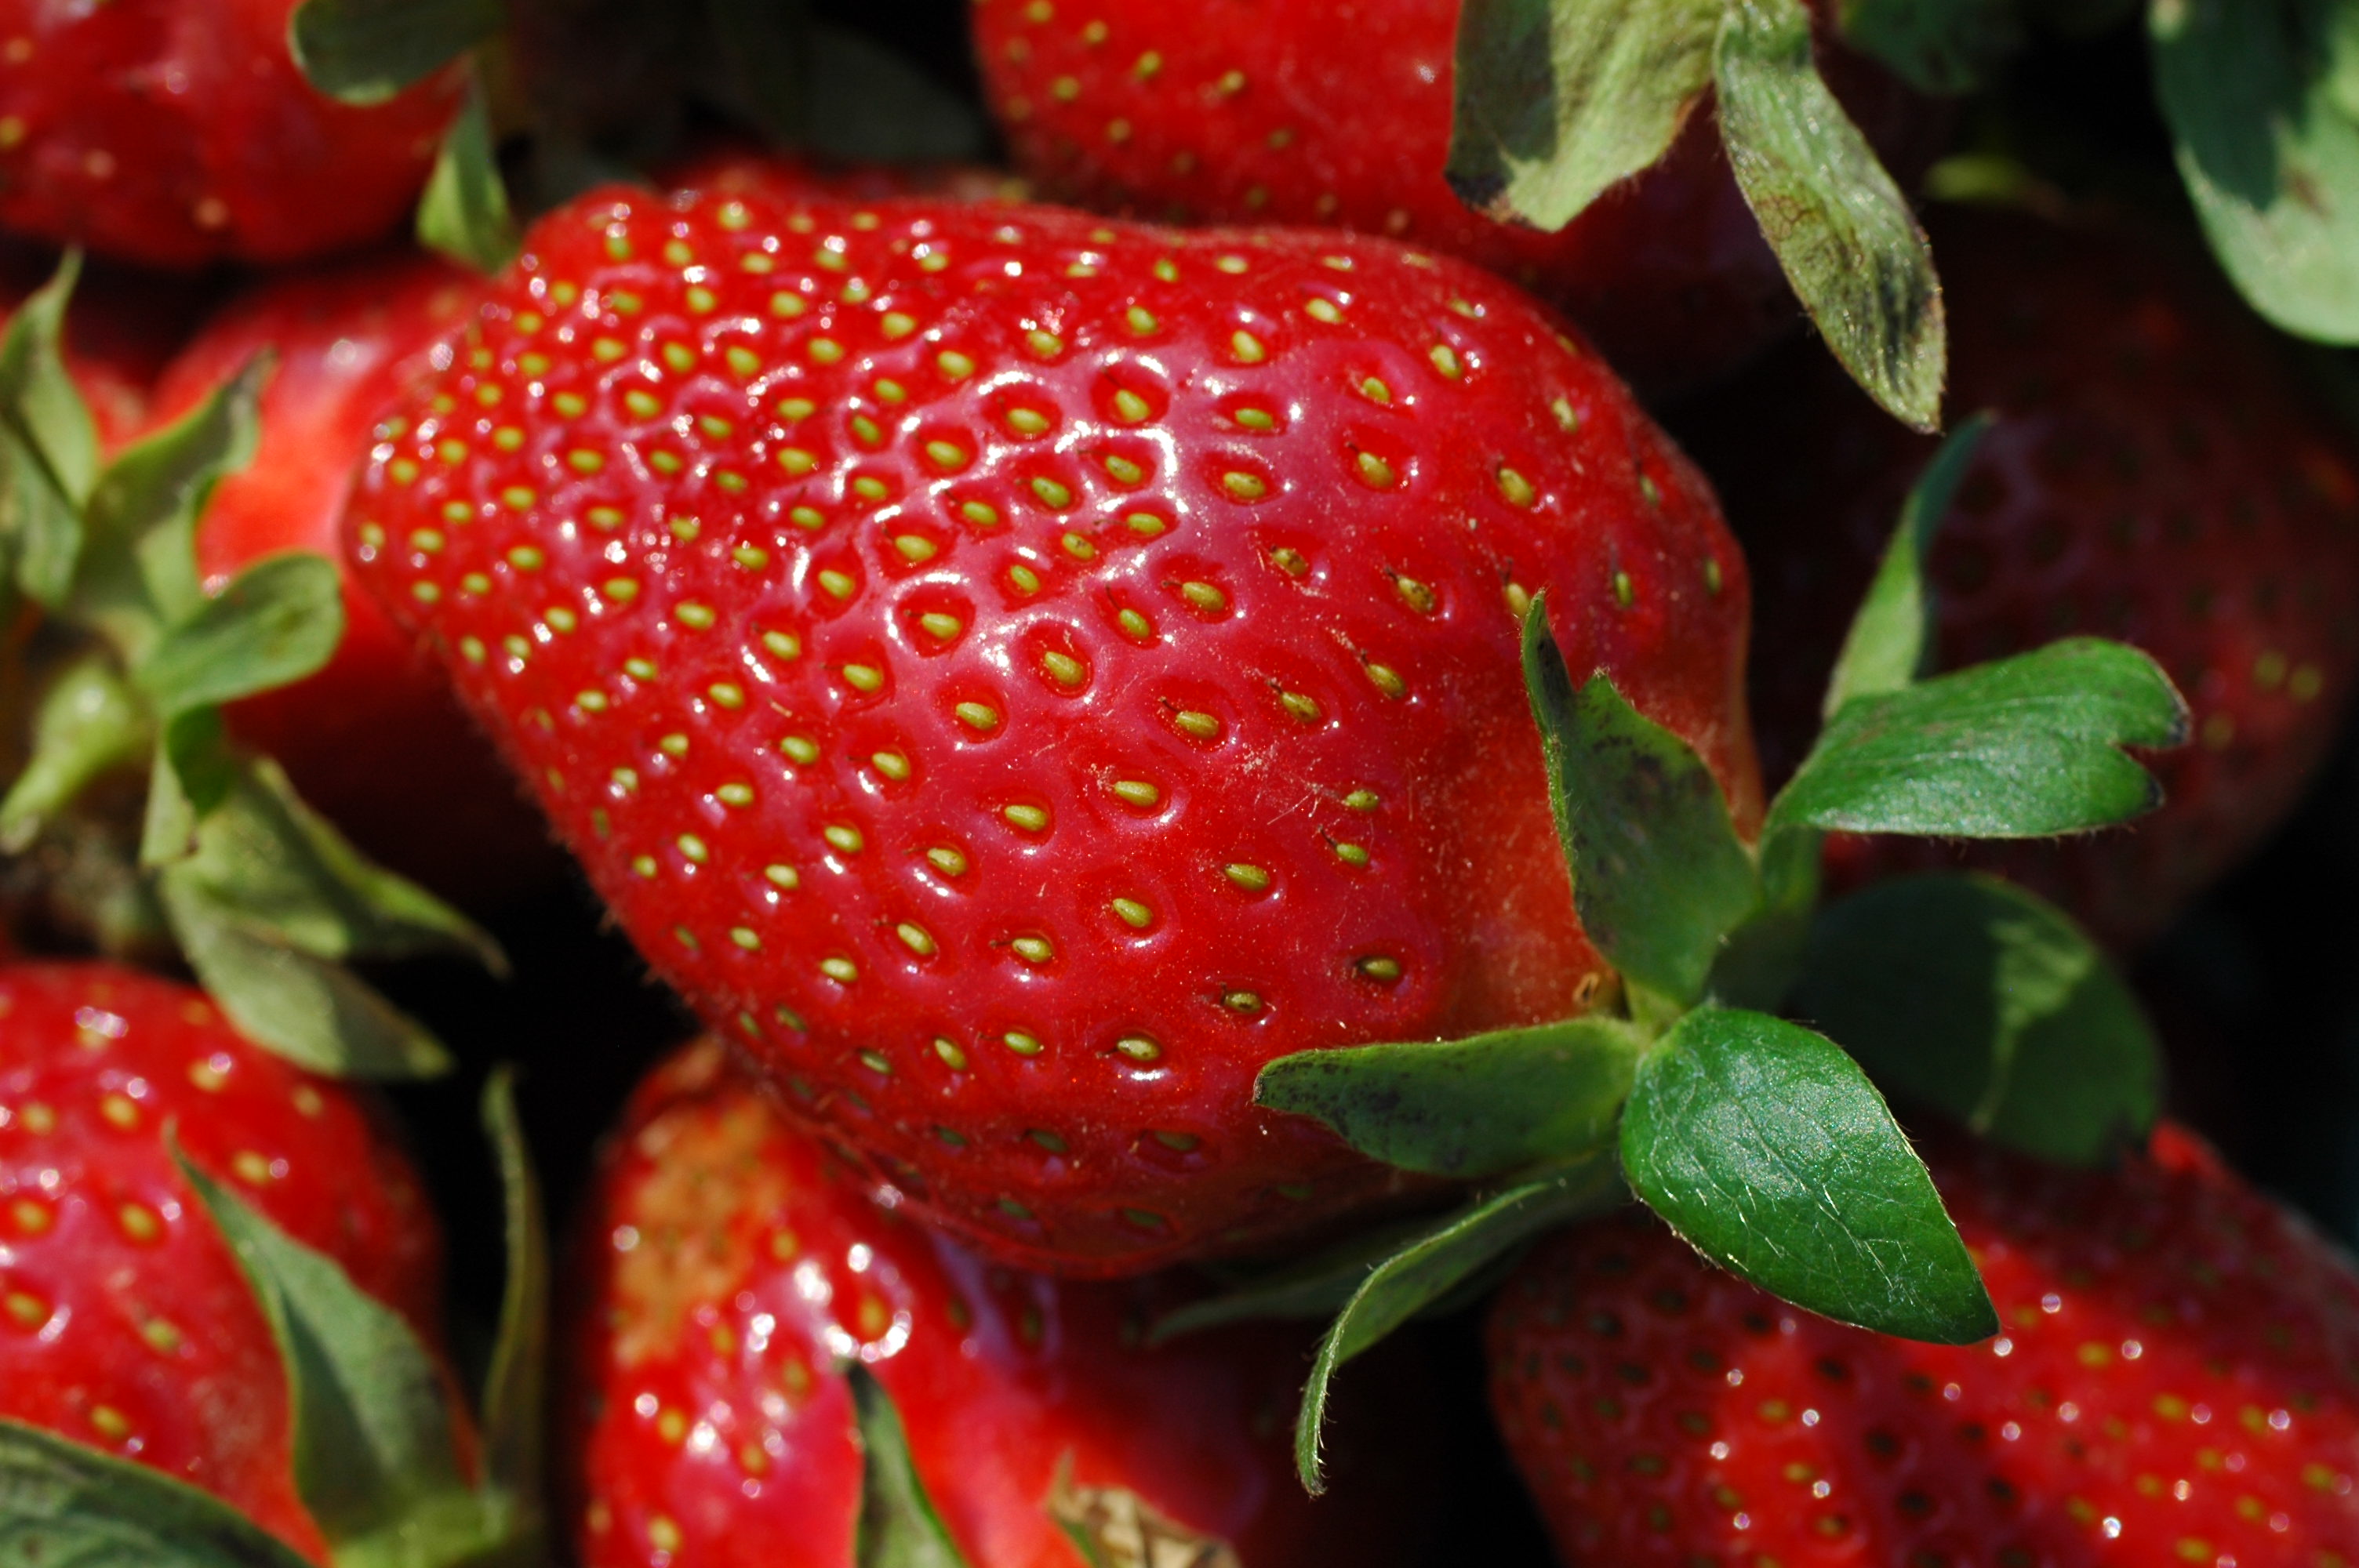 Breeding strawberries at Rutgers from start to finish